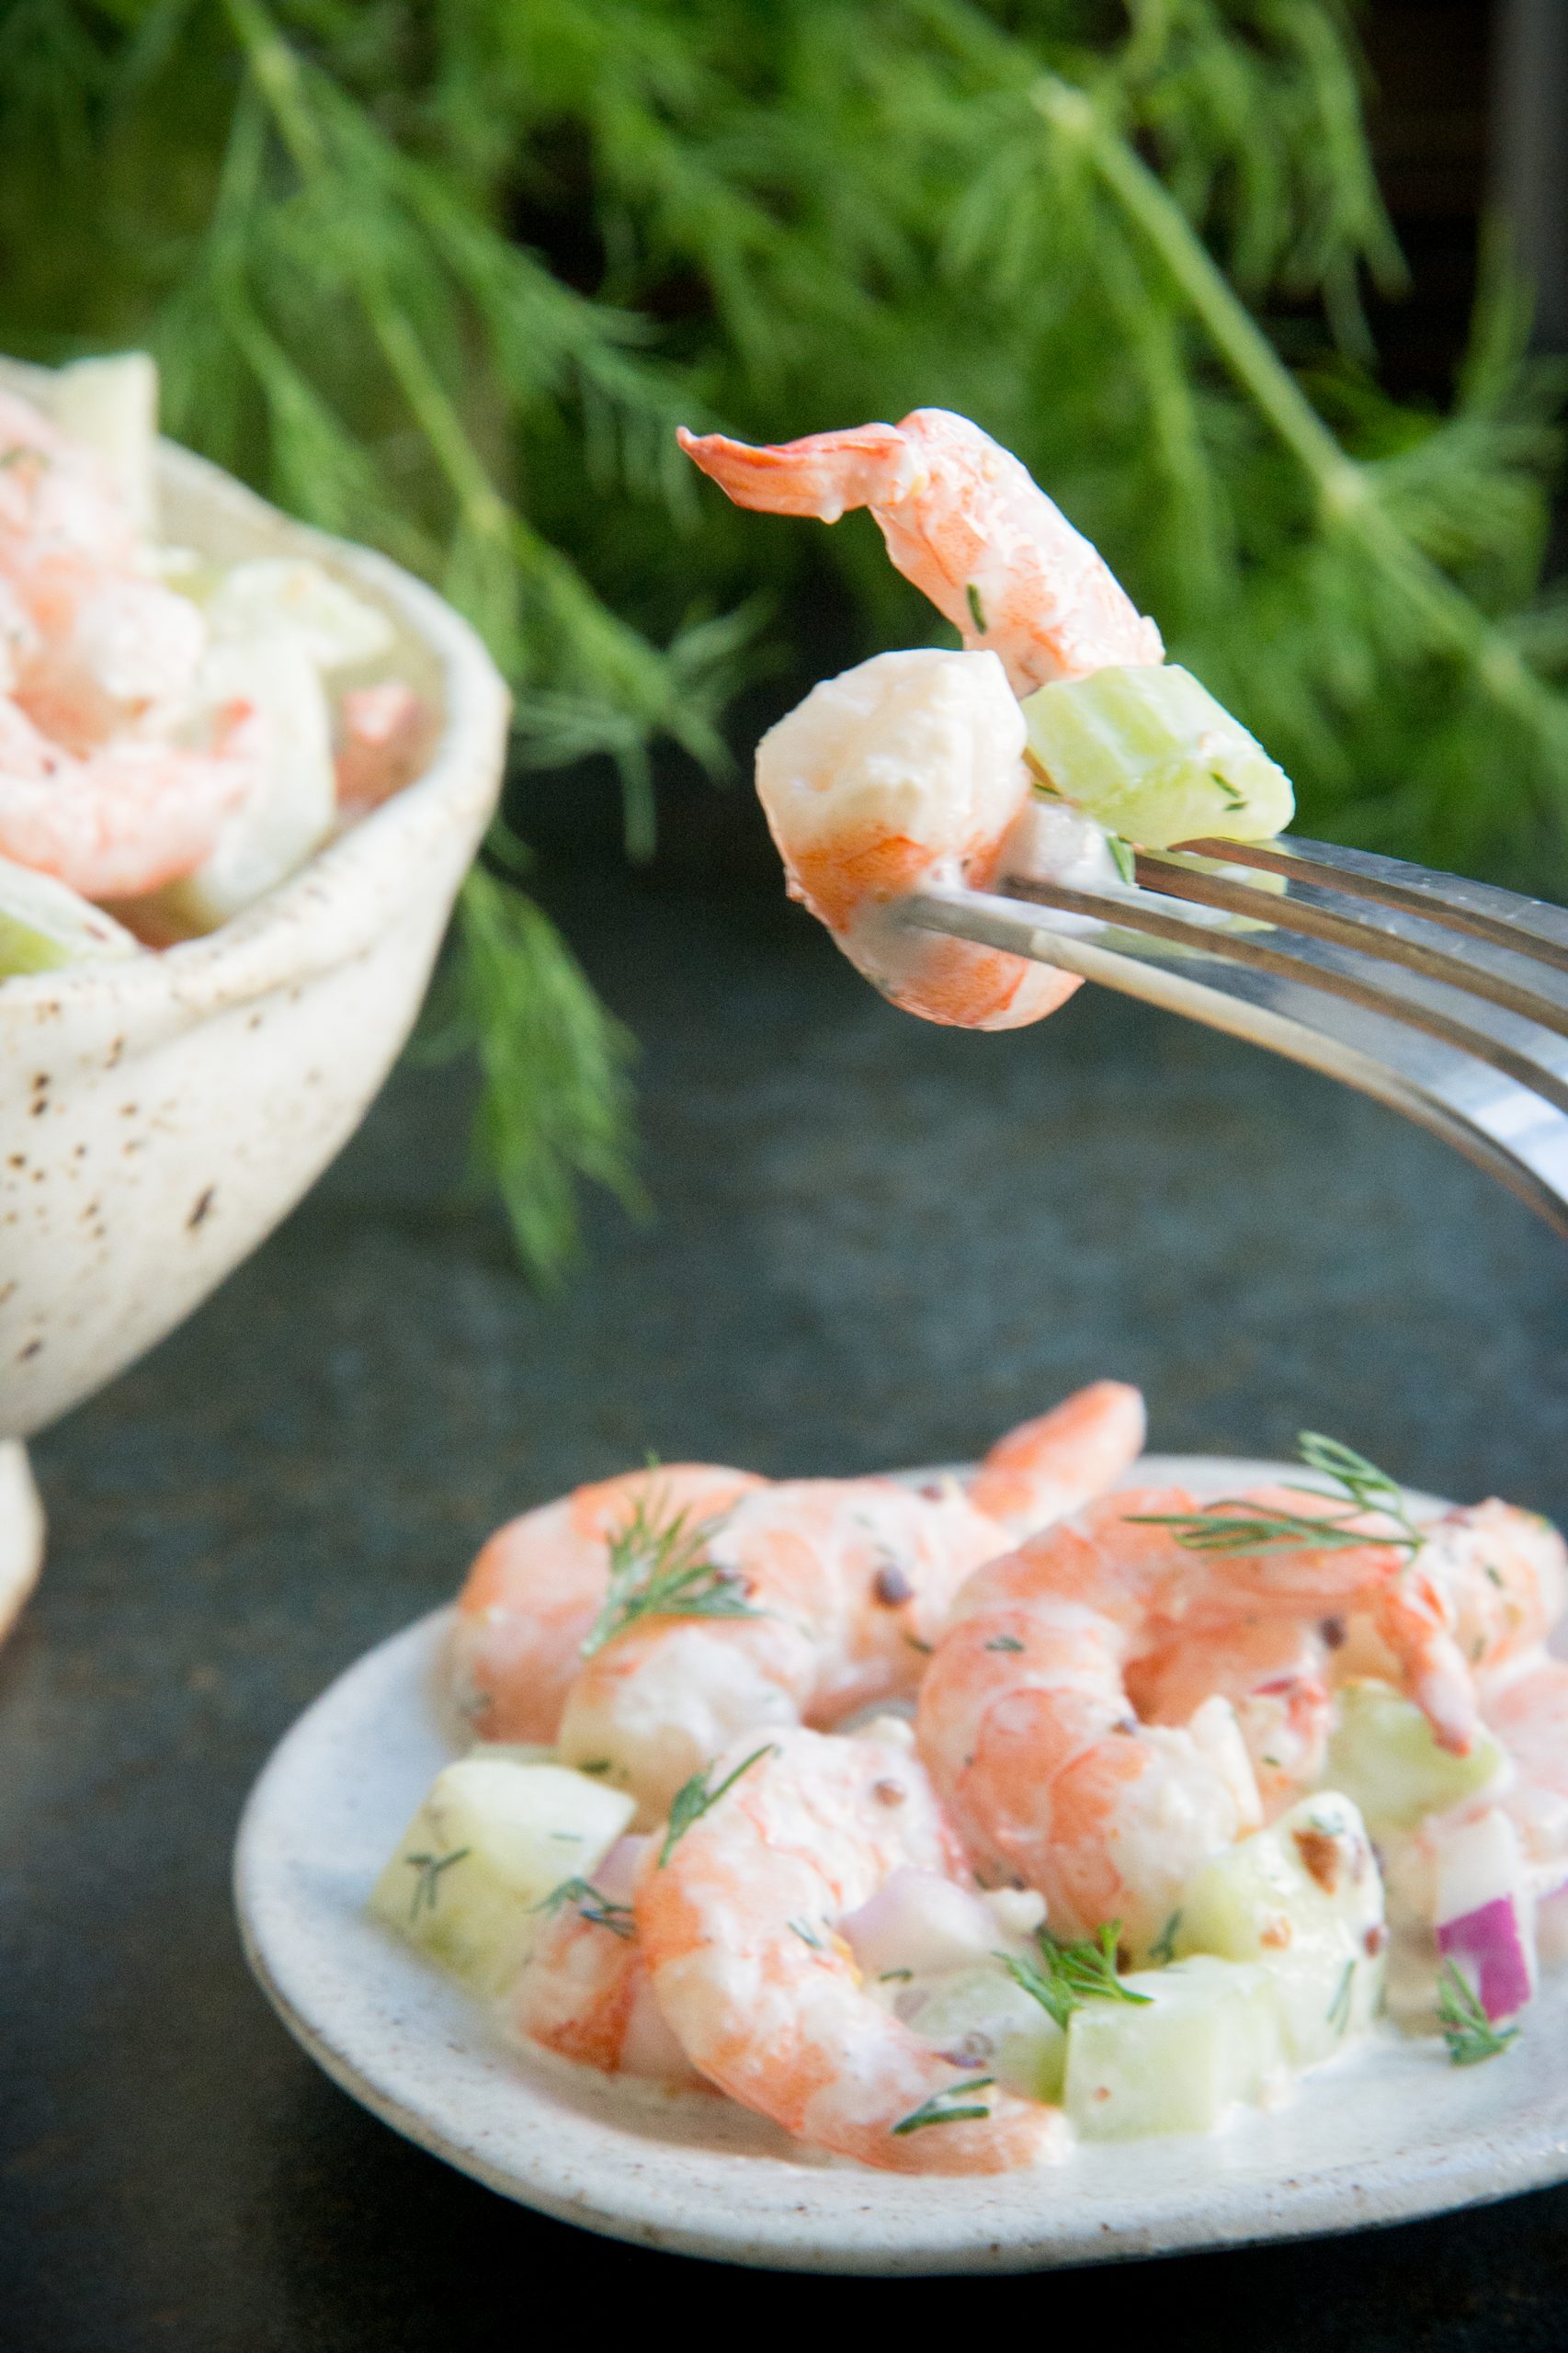 Taking a bite of our creamy shrimp salad.